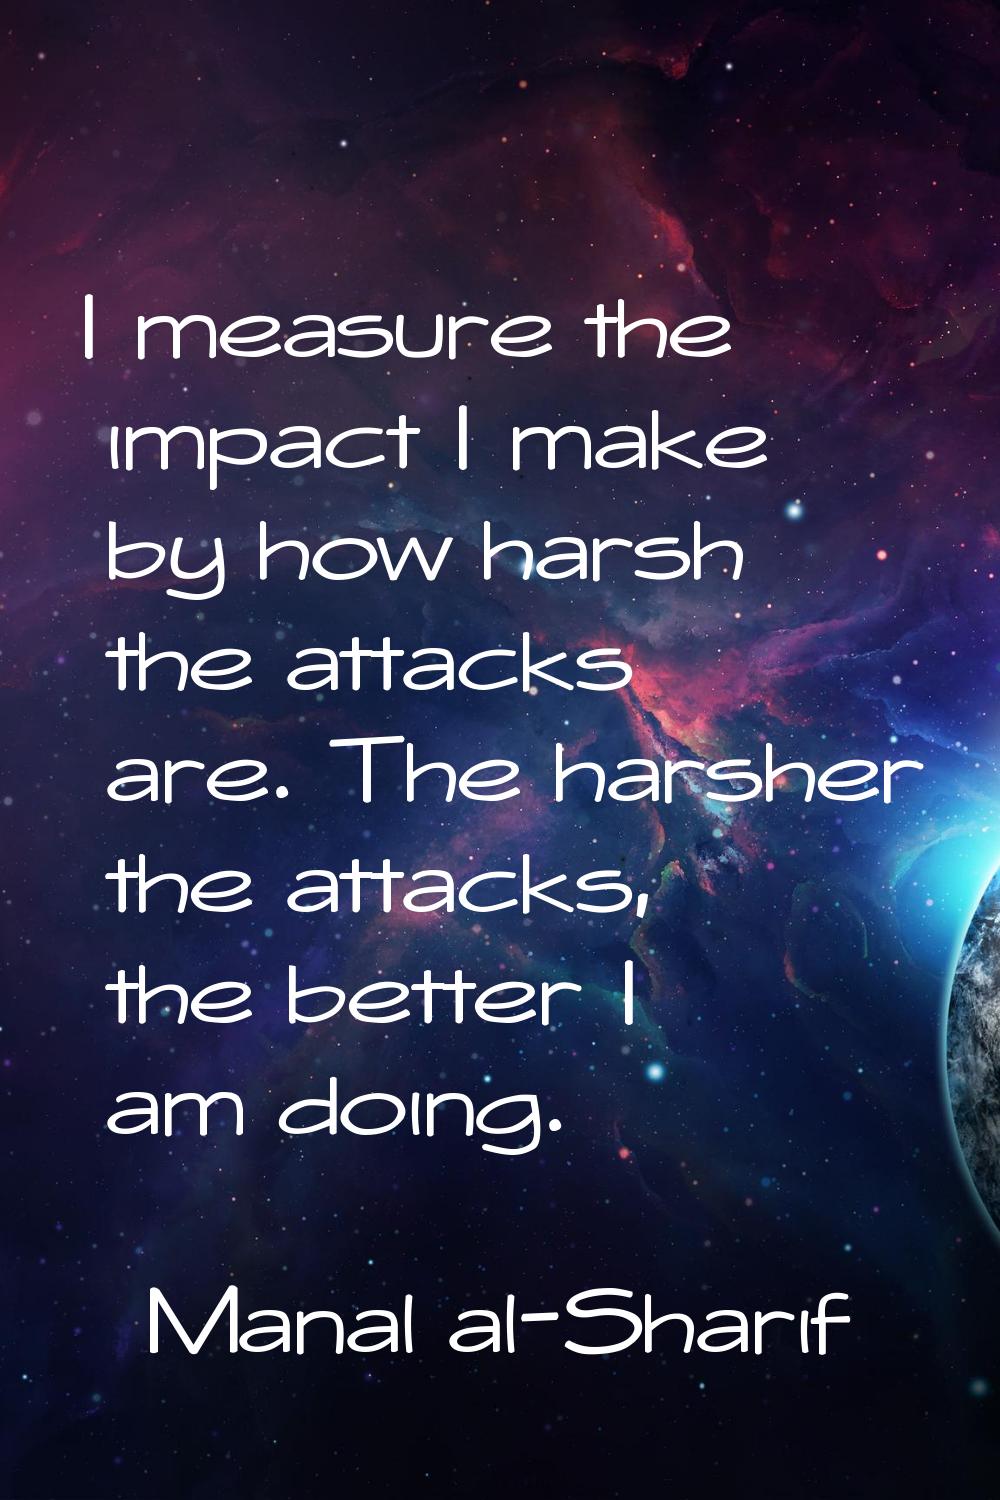 I measure the impact I make by how harsh the attacks are. The harsher the attacks, the better I am 